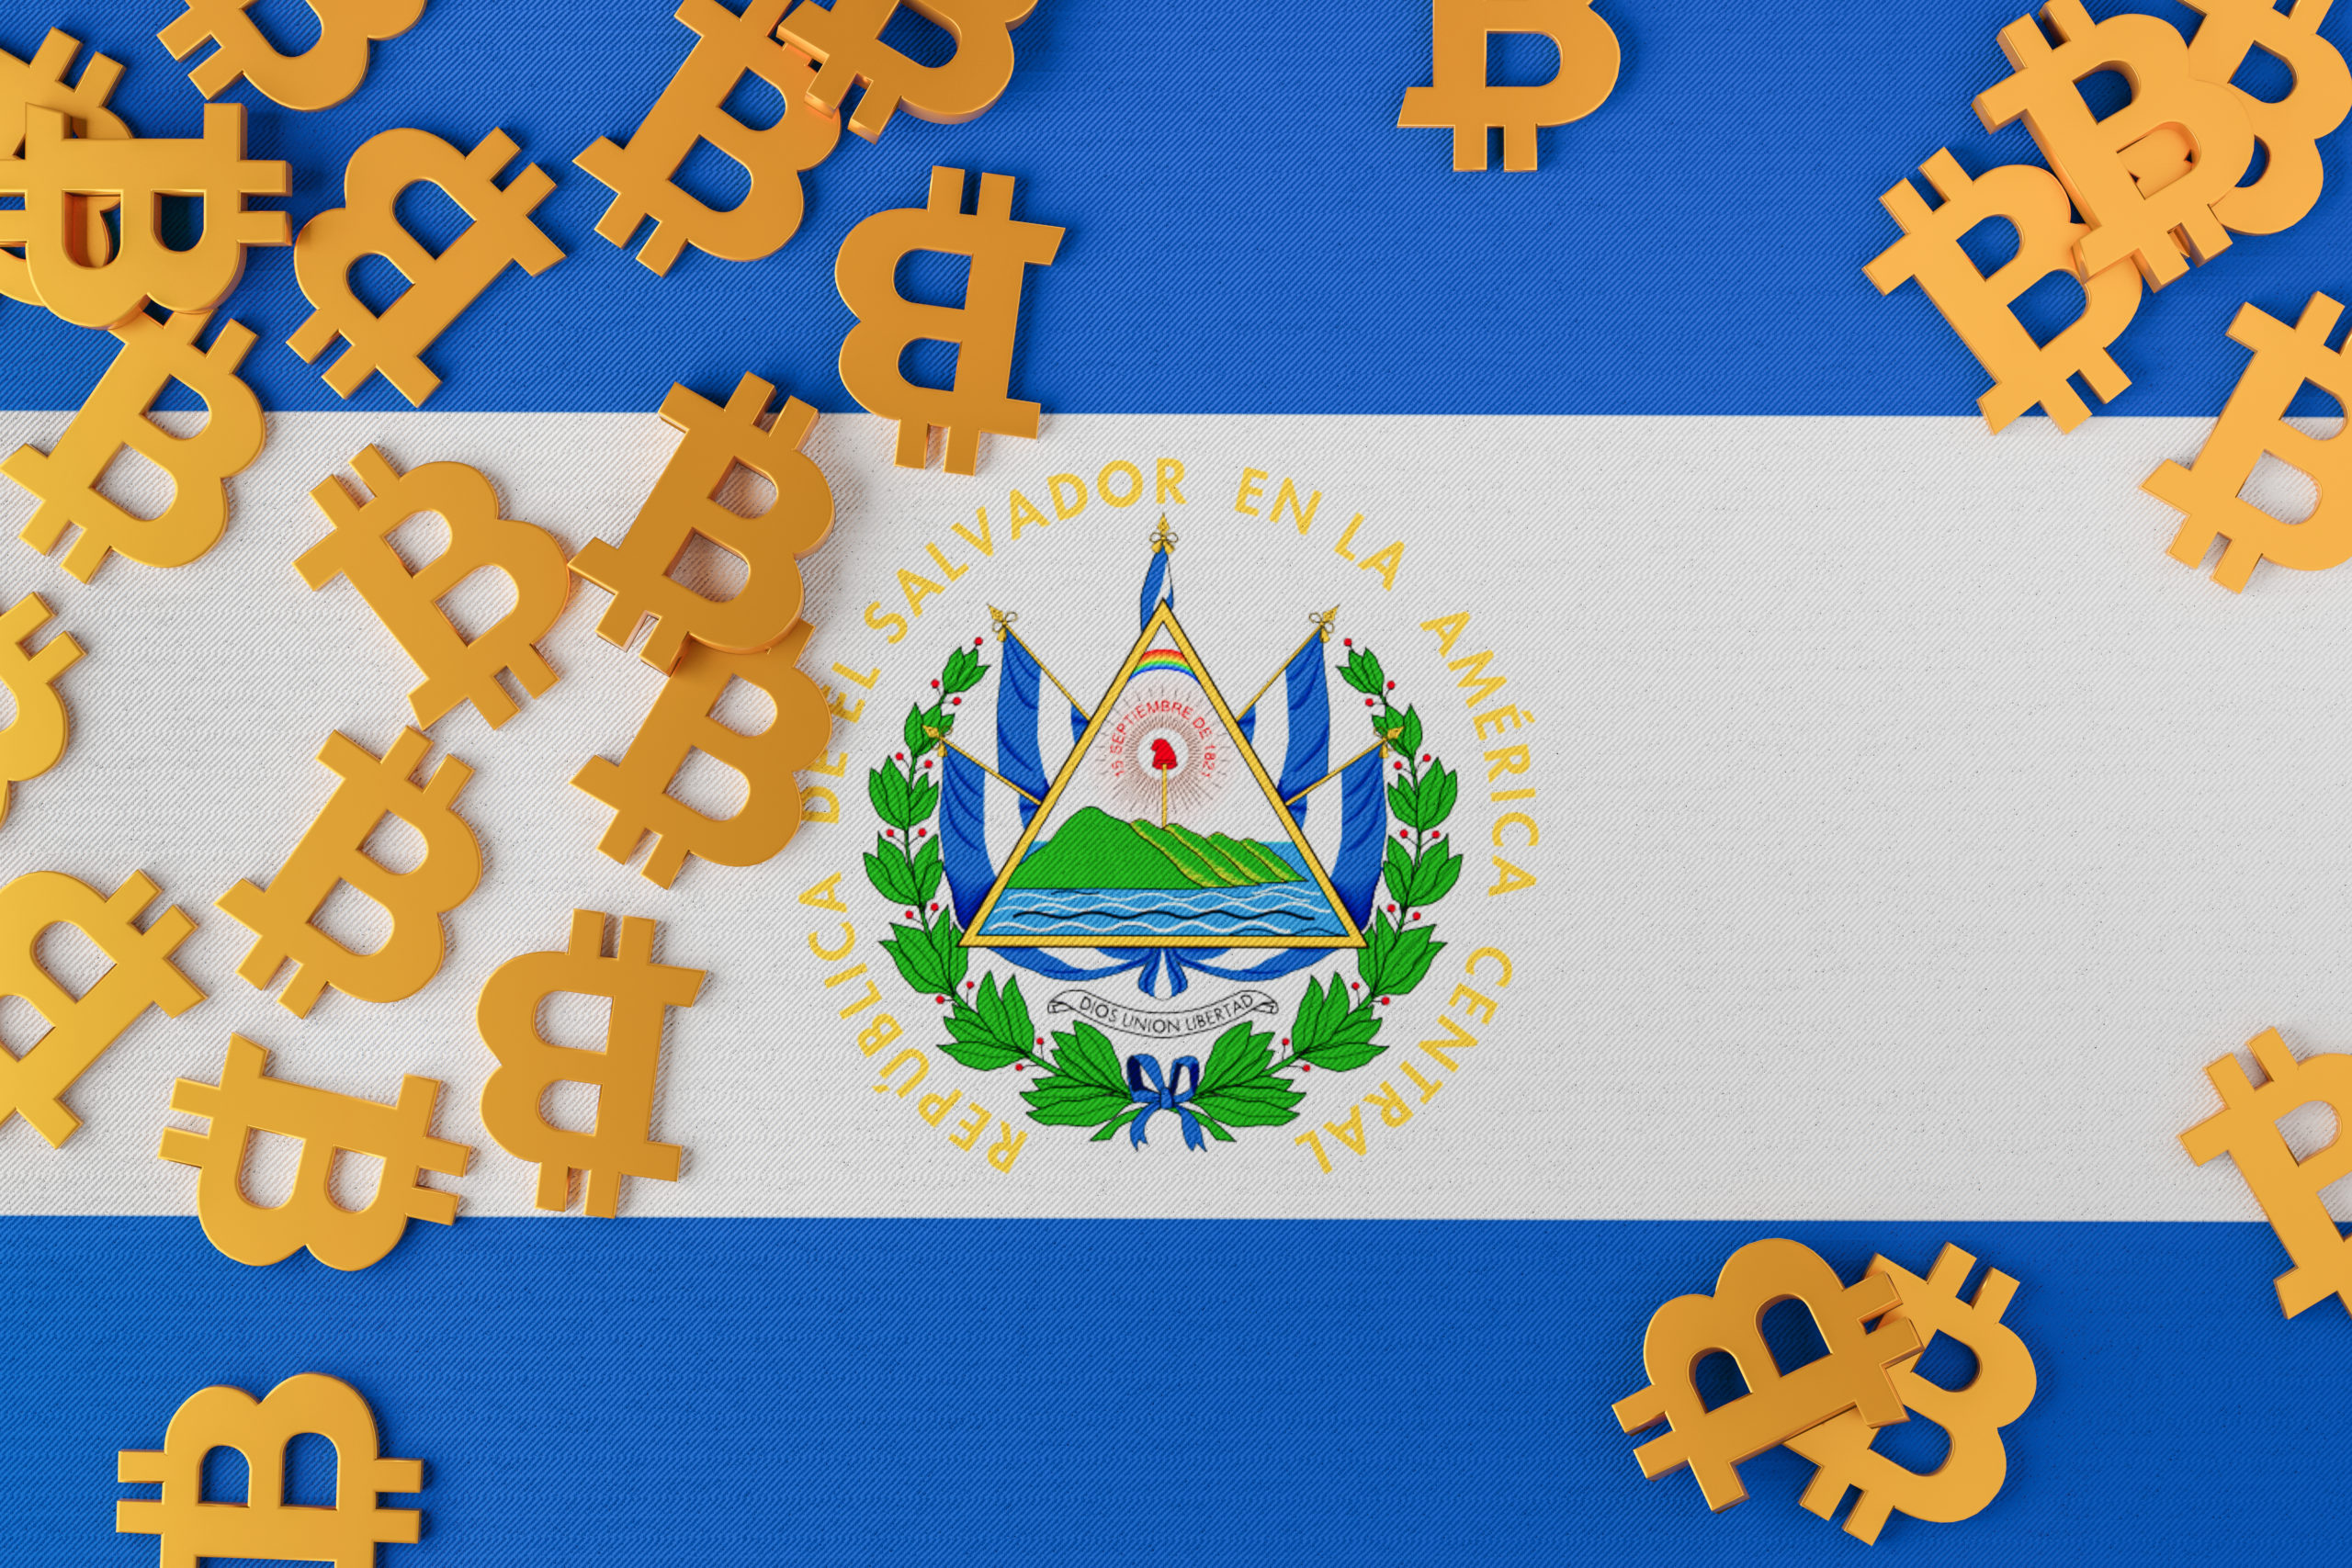 7.5 months later, El Salvador's Bitcoin strategy is stumbling